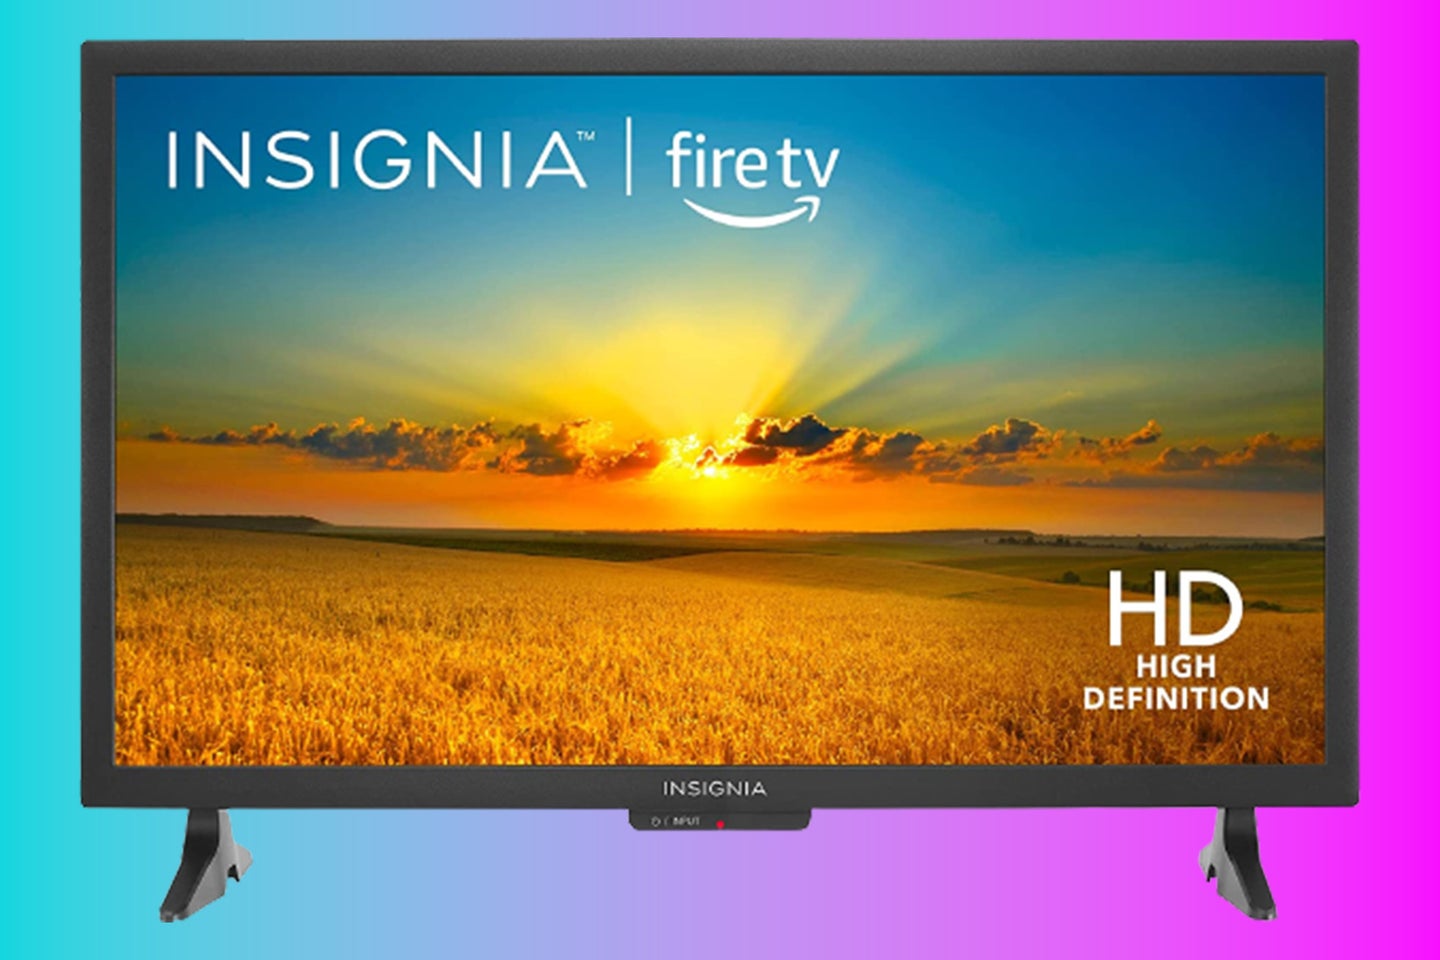 An Insignia Fire TV on a pink and blue background